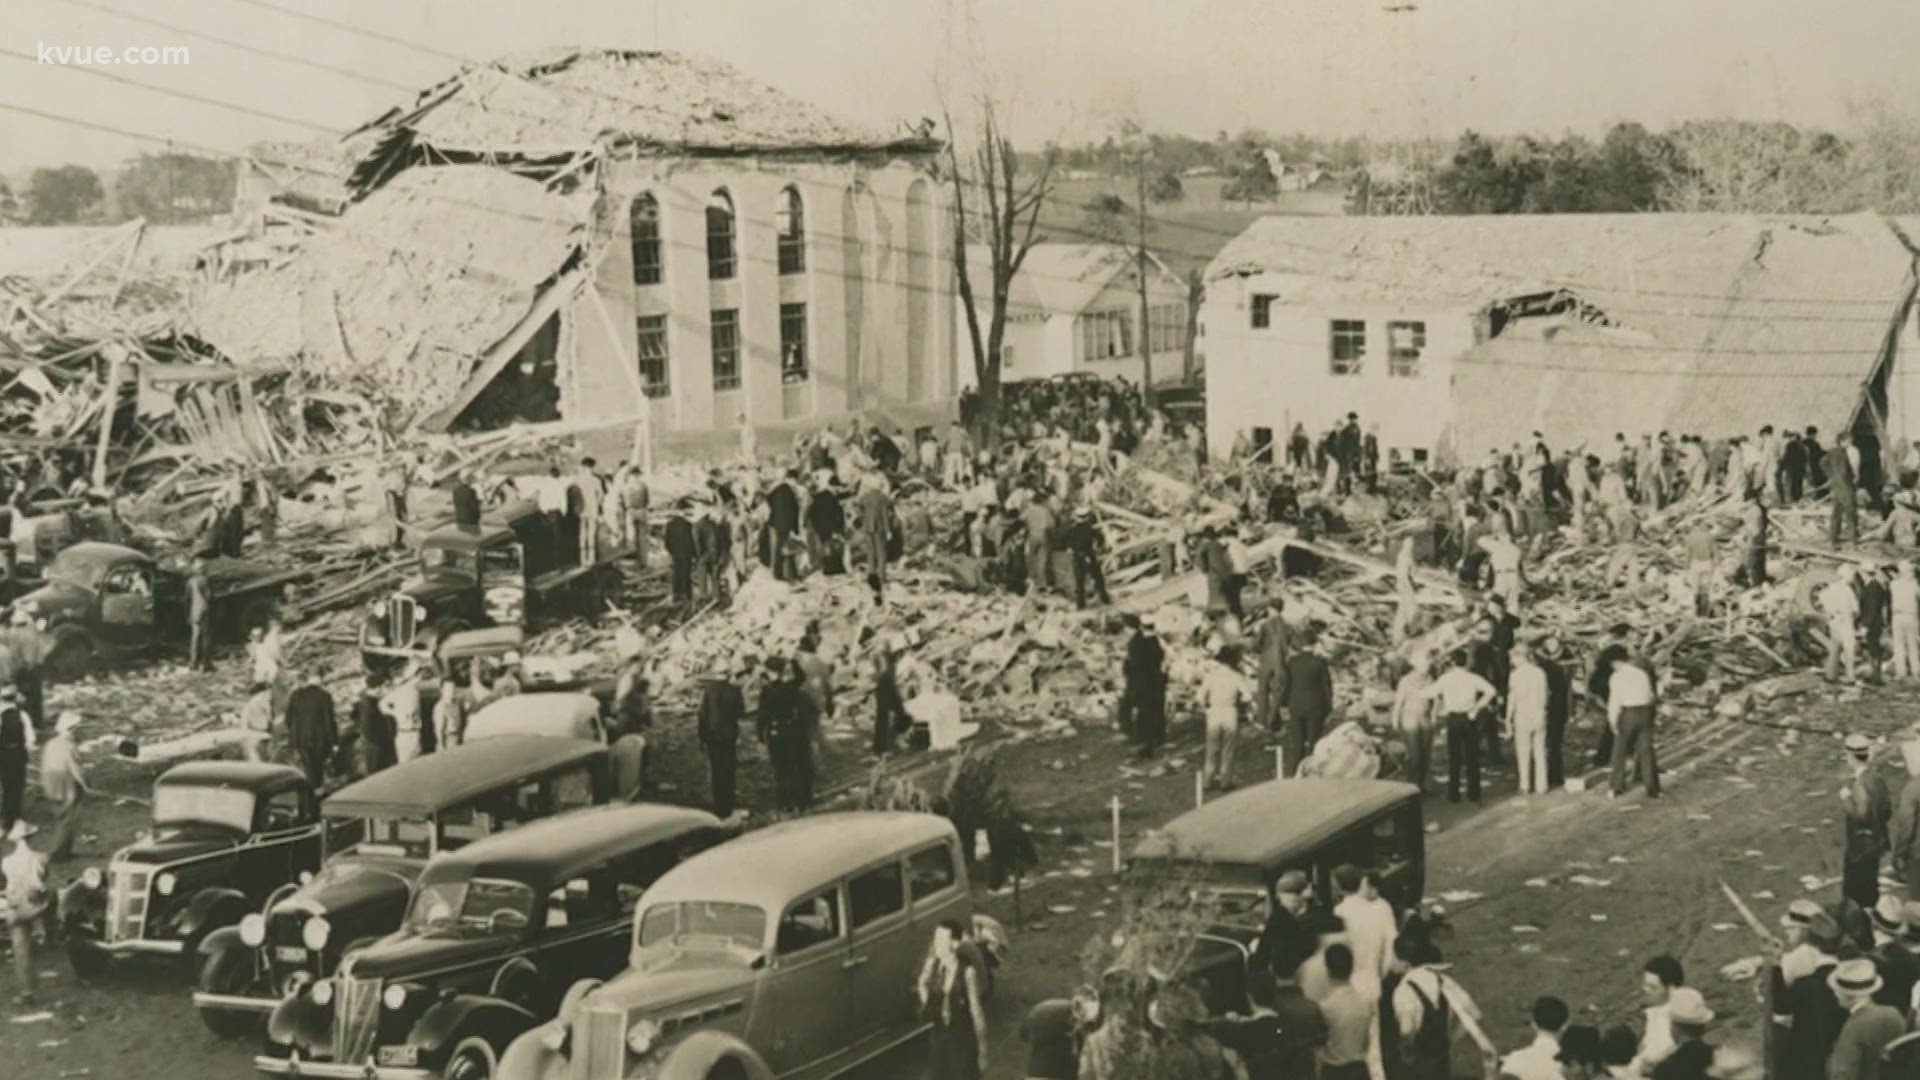 On today's Backstory, KVUE looks at the New London, Texas, gas explosion of 1937. It's still considered one of the worst disasters to ever occur in Texas.